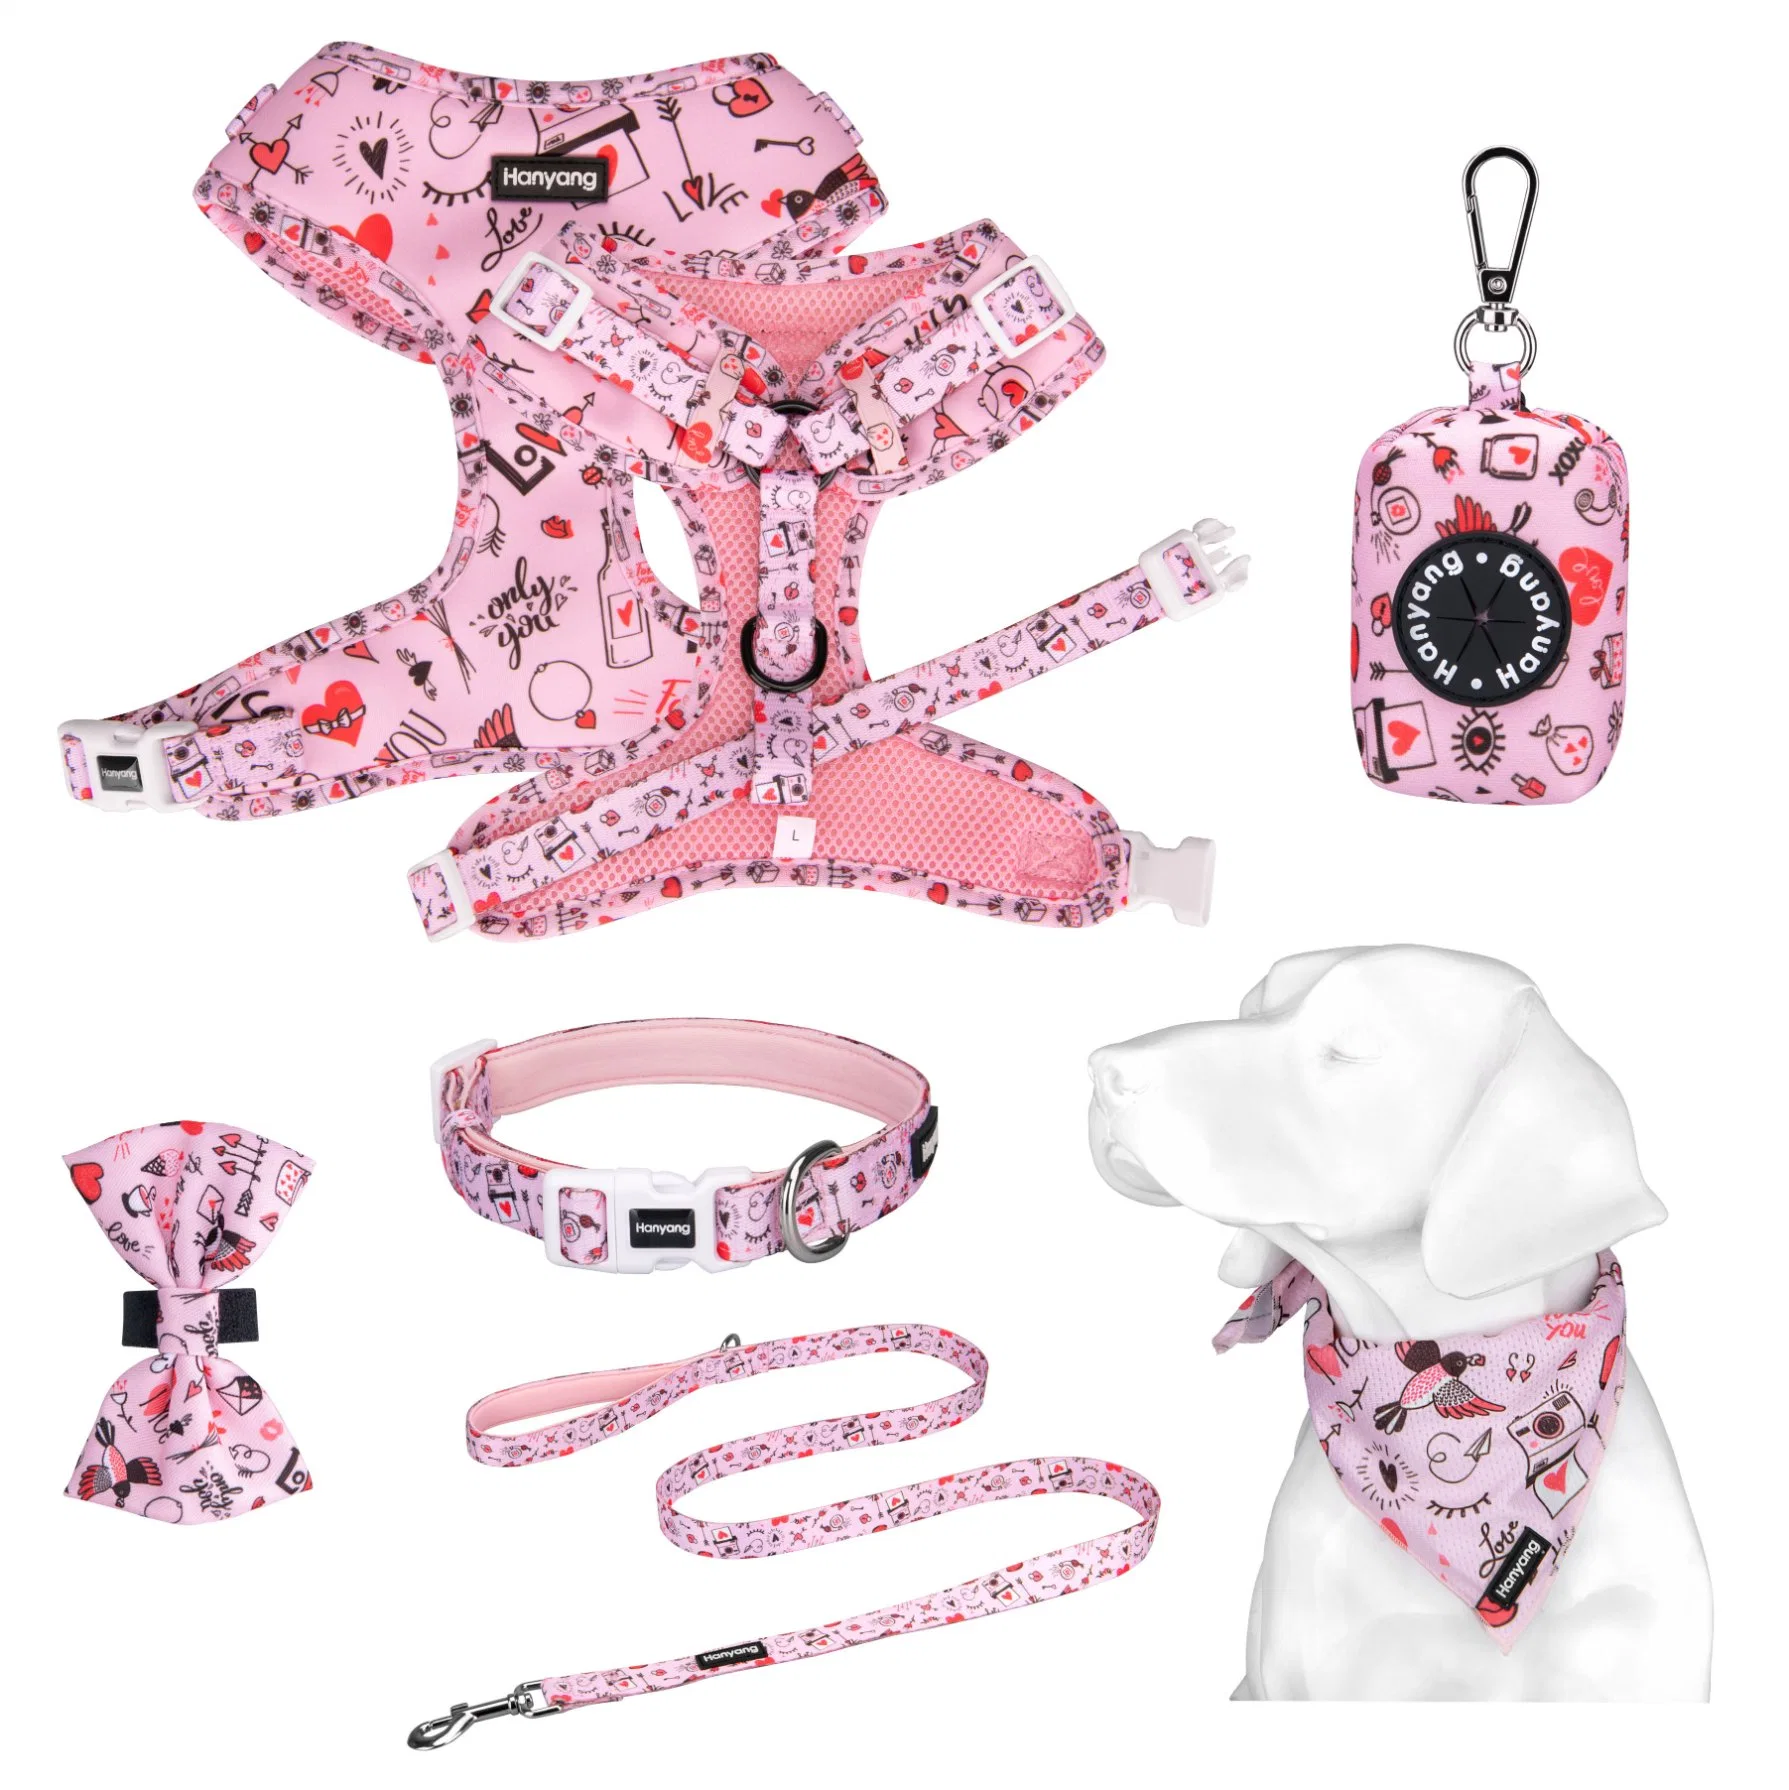 Hanyang Adjustable Reversible Dog Harness Matching Accessories with Custom Pattern Dog Harness Add Brand Label